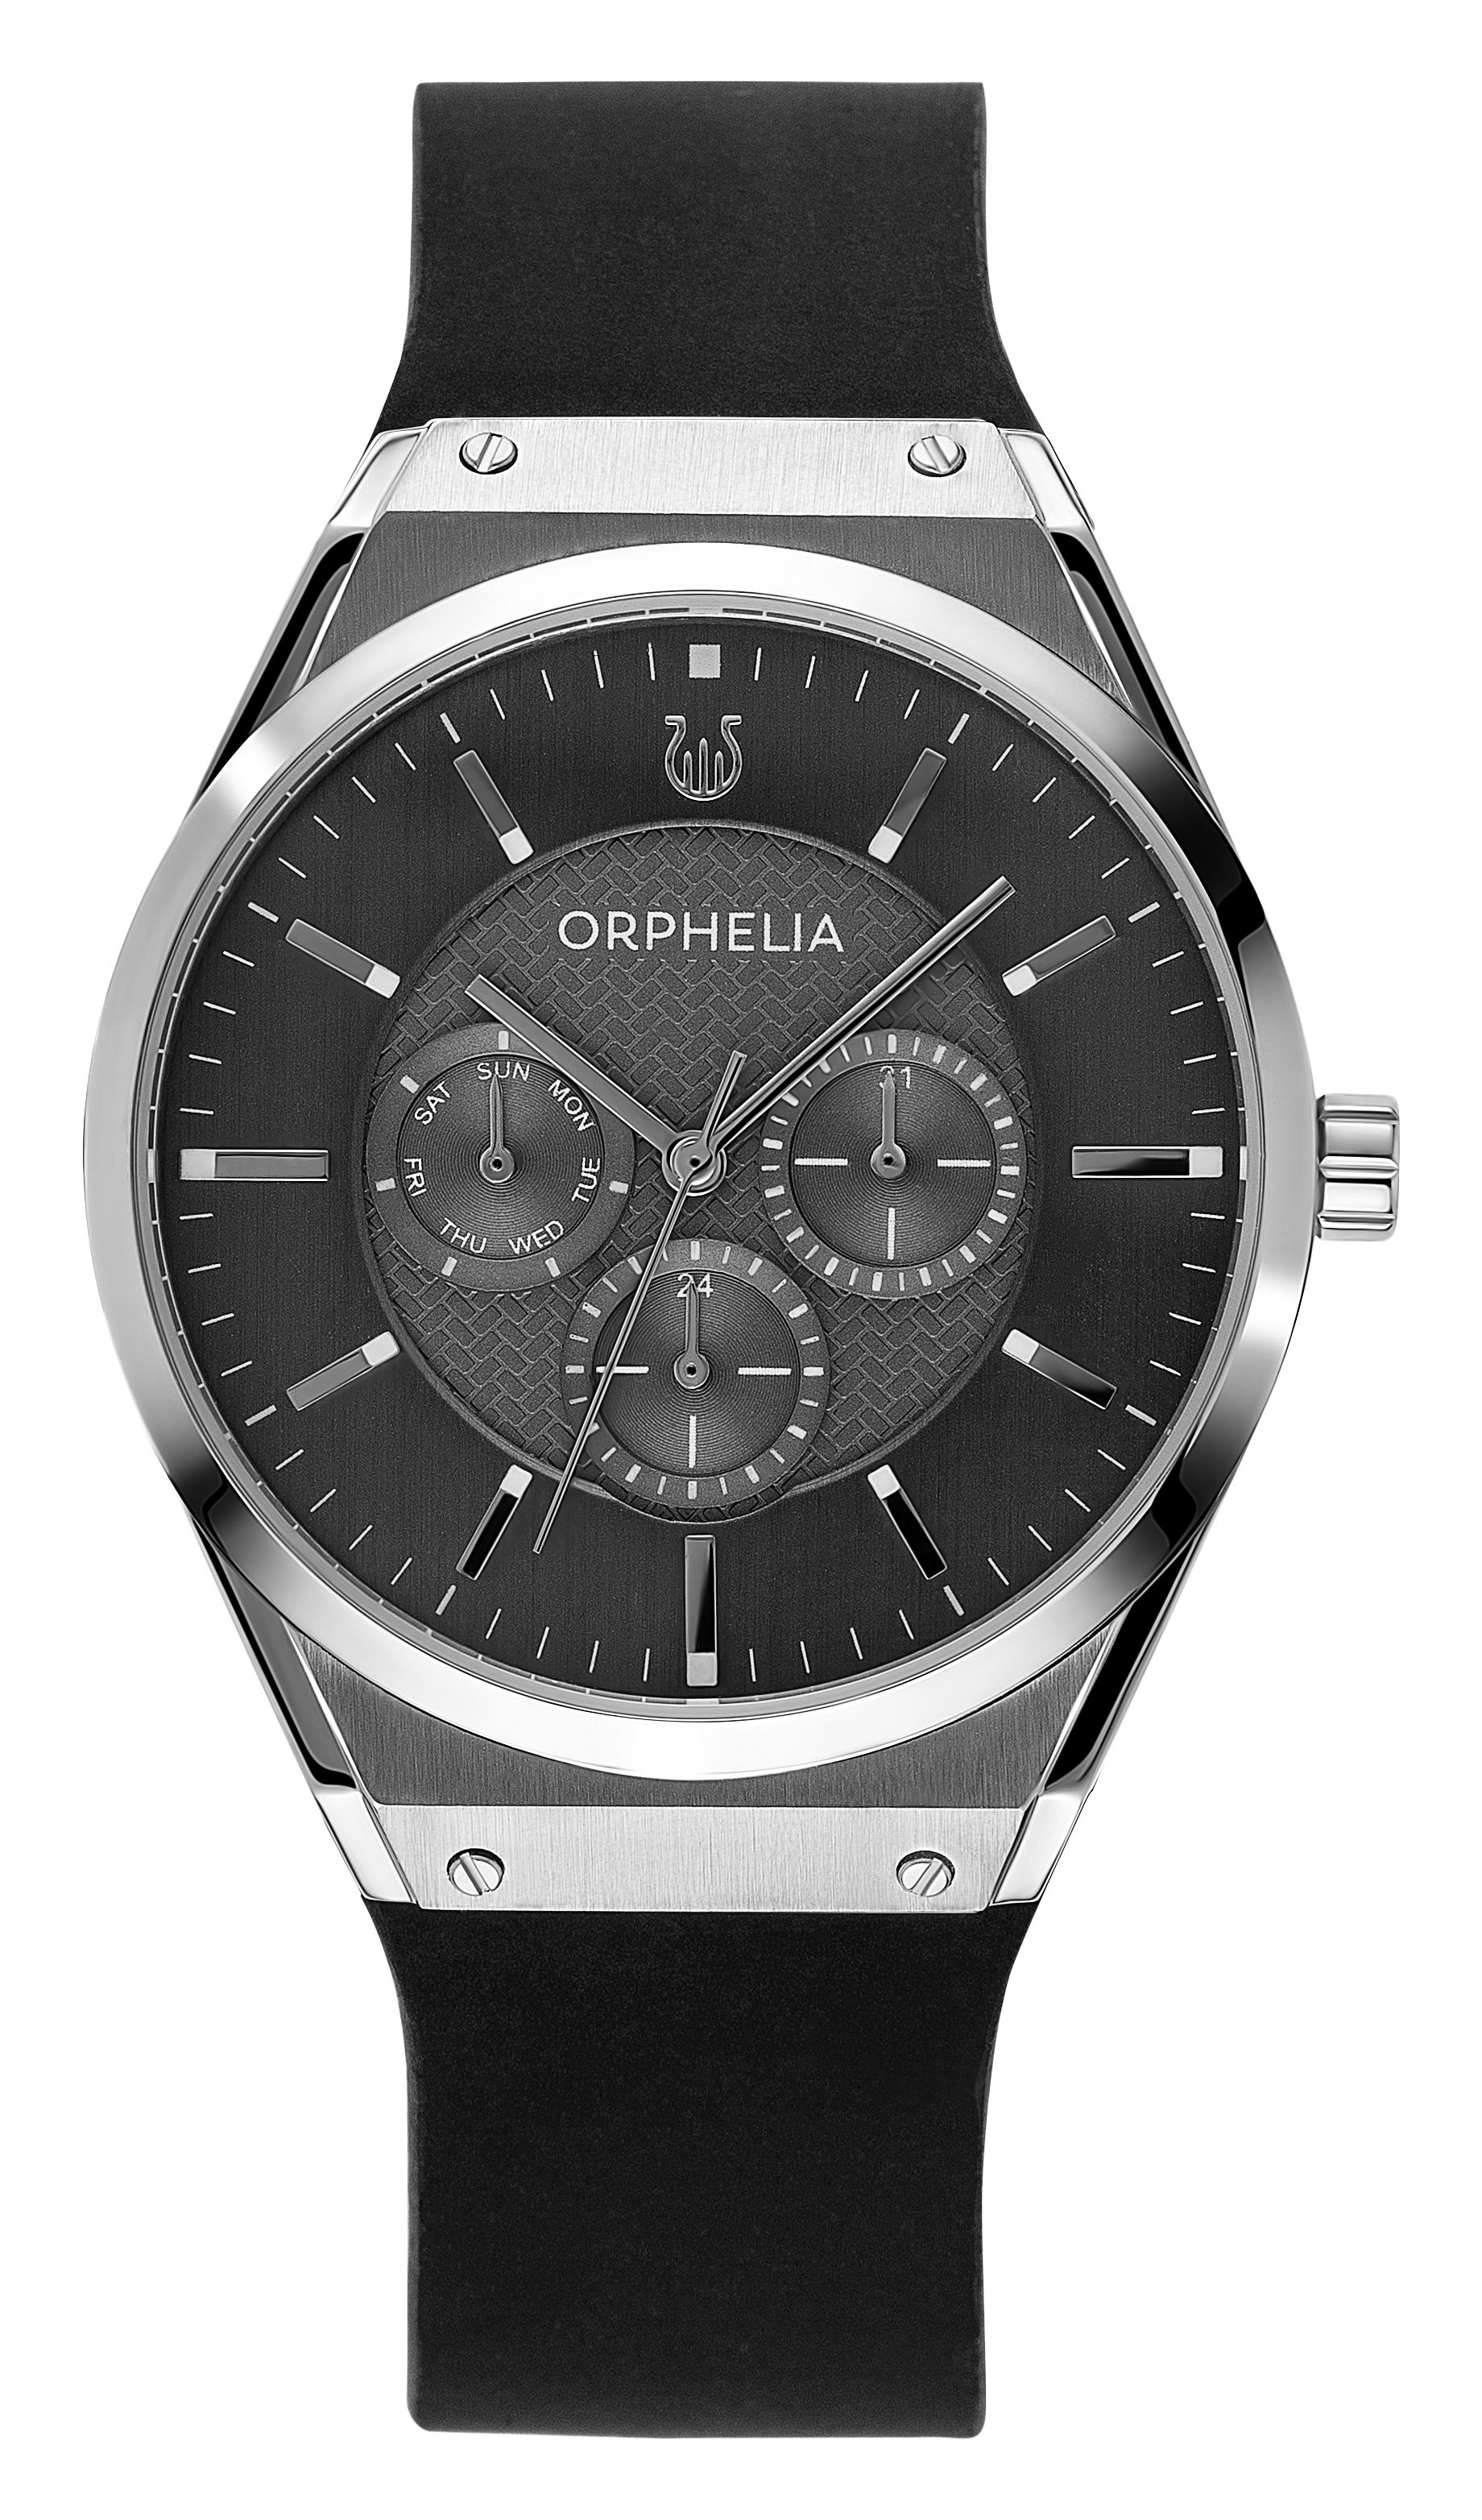 This Orphelia Saffiano Multi Dial Watch for Men is the perfect timepiece to wear or to gift. It's Silver 41 mm Round case combined with the comfortable Black Genuine Leather watch band will ensure you enjoy this stunning timepiece without any compromise. Operated by a high quality Quartz movement and water resistant to 3 bars, your watch will keep ticking. GREAT DESIGN: ORPHELIA Saffiano Multi dial watch with a Miyota Quartz movement includes a date display and has a very comfortable genuine leather strap. This watch features a 24 hour display. perfect for parties, date nights and wearing in the office. PREMIUM QUALITY: By using high-quality materials  Glass: Mineral Glass  Case material: Stainless steel  Bracelet material: Leather - Water resistant: 3 bars COMPACT SIZE: Case diameter: 41 mm  Height: 9 mm  Strap- Length: 22 cm  Width: 20 mm. Due to this practical handy size  the watch is absolutely for everyday use-Weight: 61 g